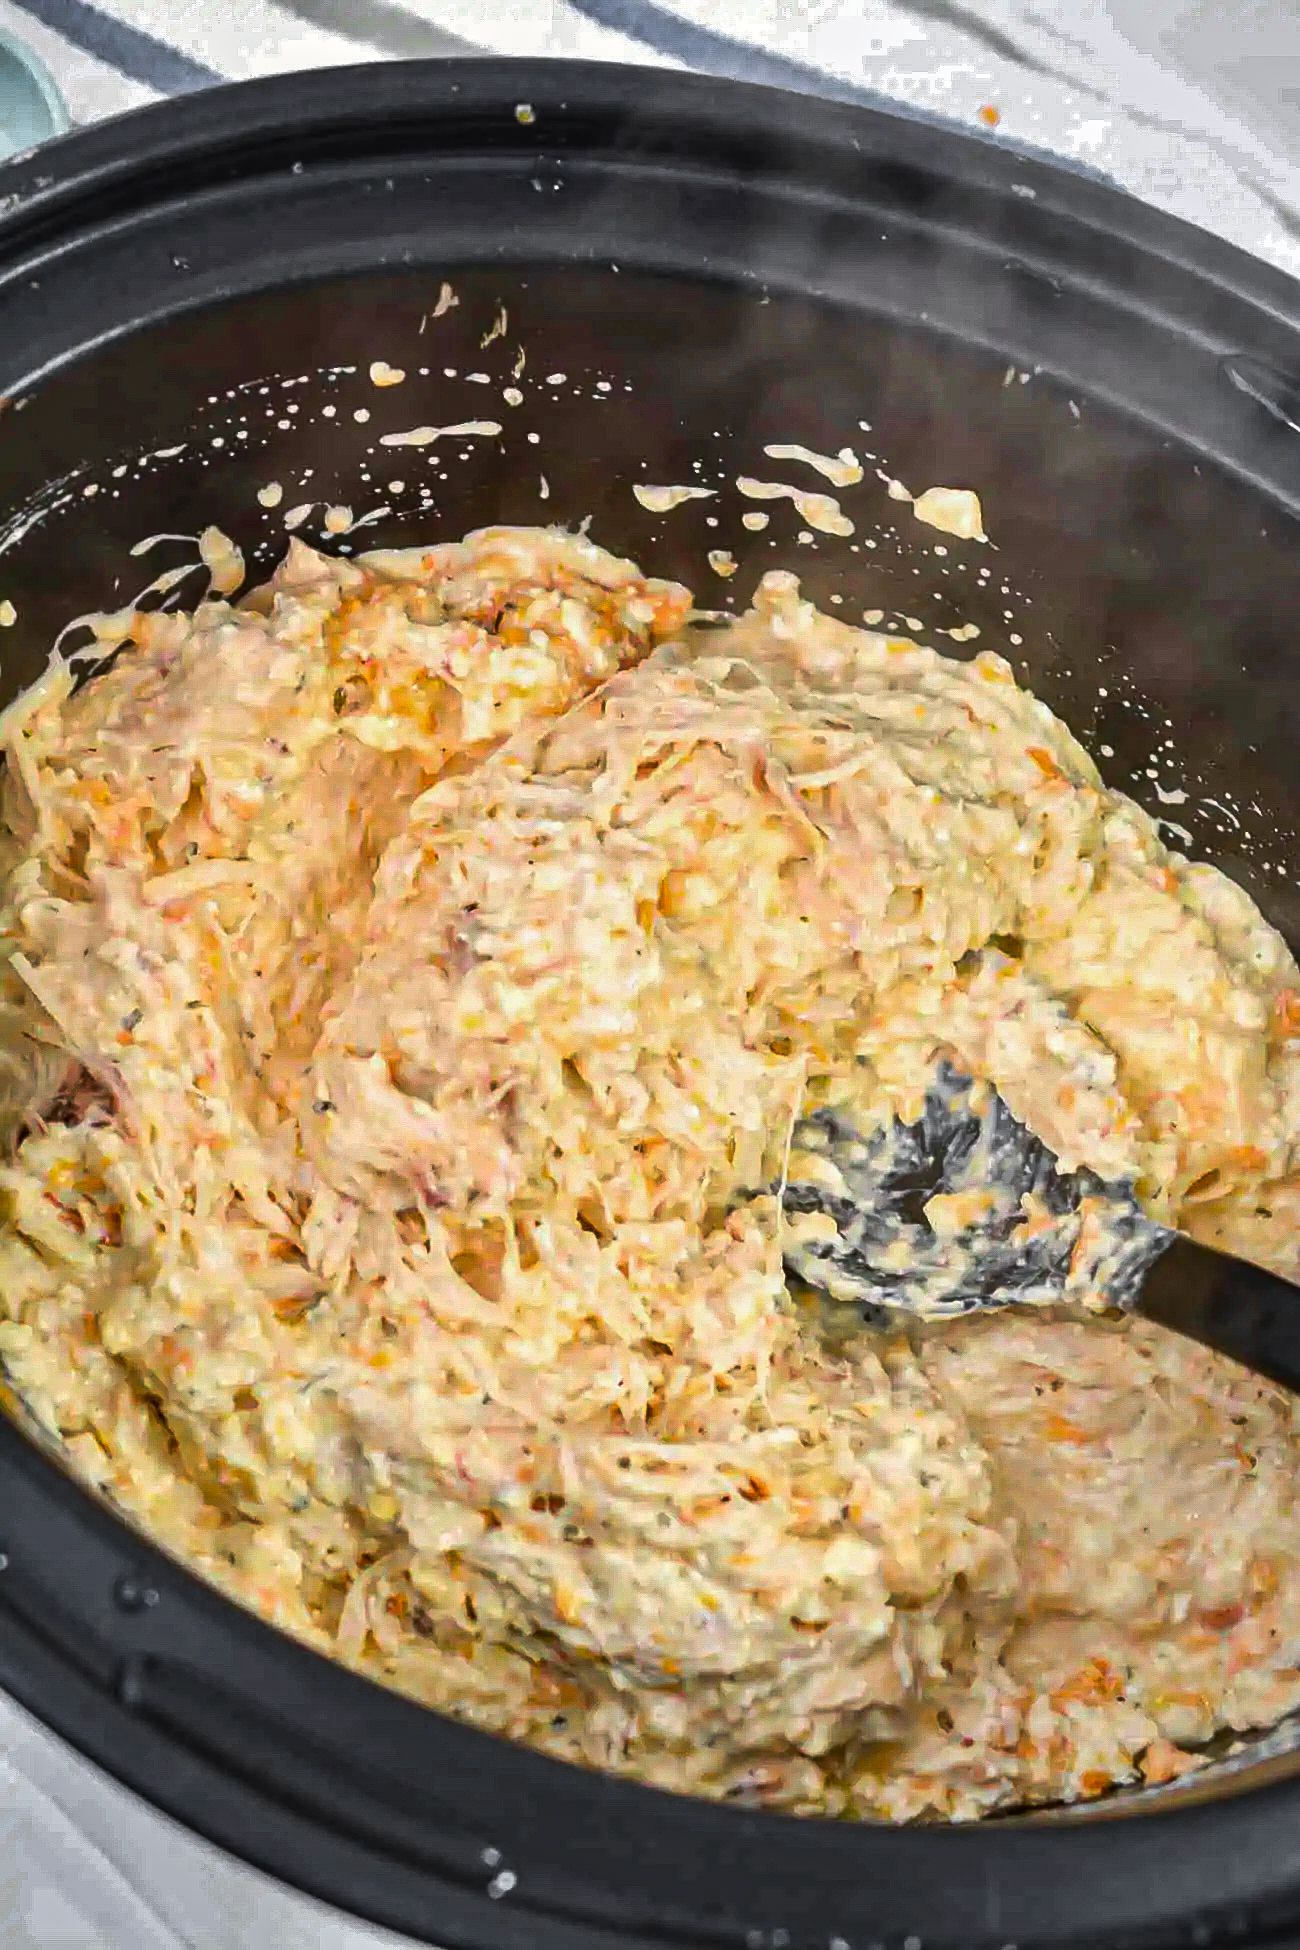 Remove the lid, shred the chicken, and stir to combine the ingredients in the slow cooker well.